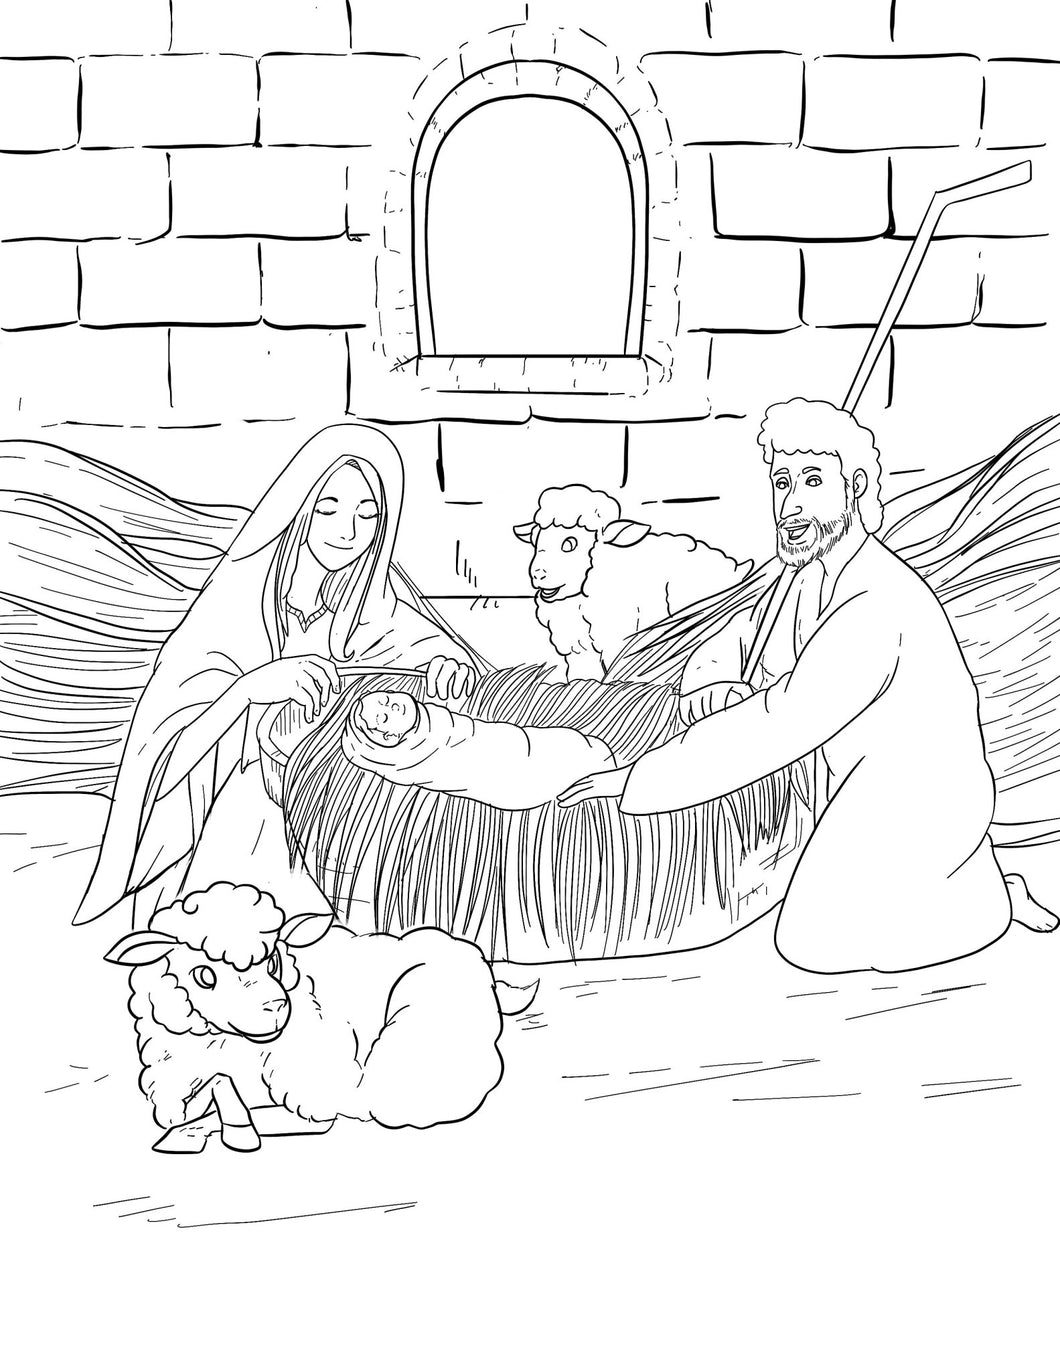 Jesus' Birth - Nativity Coloring Page - Blessed Be Boutique